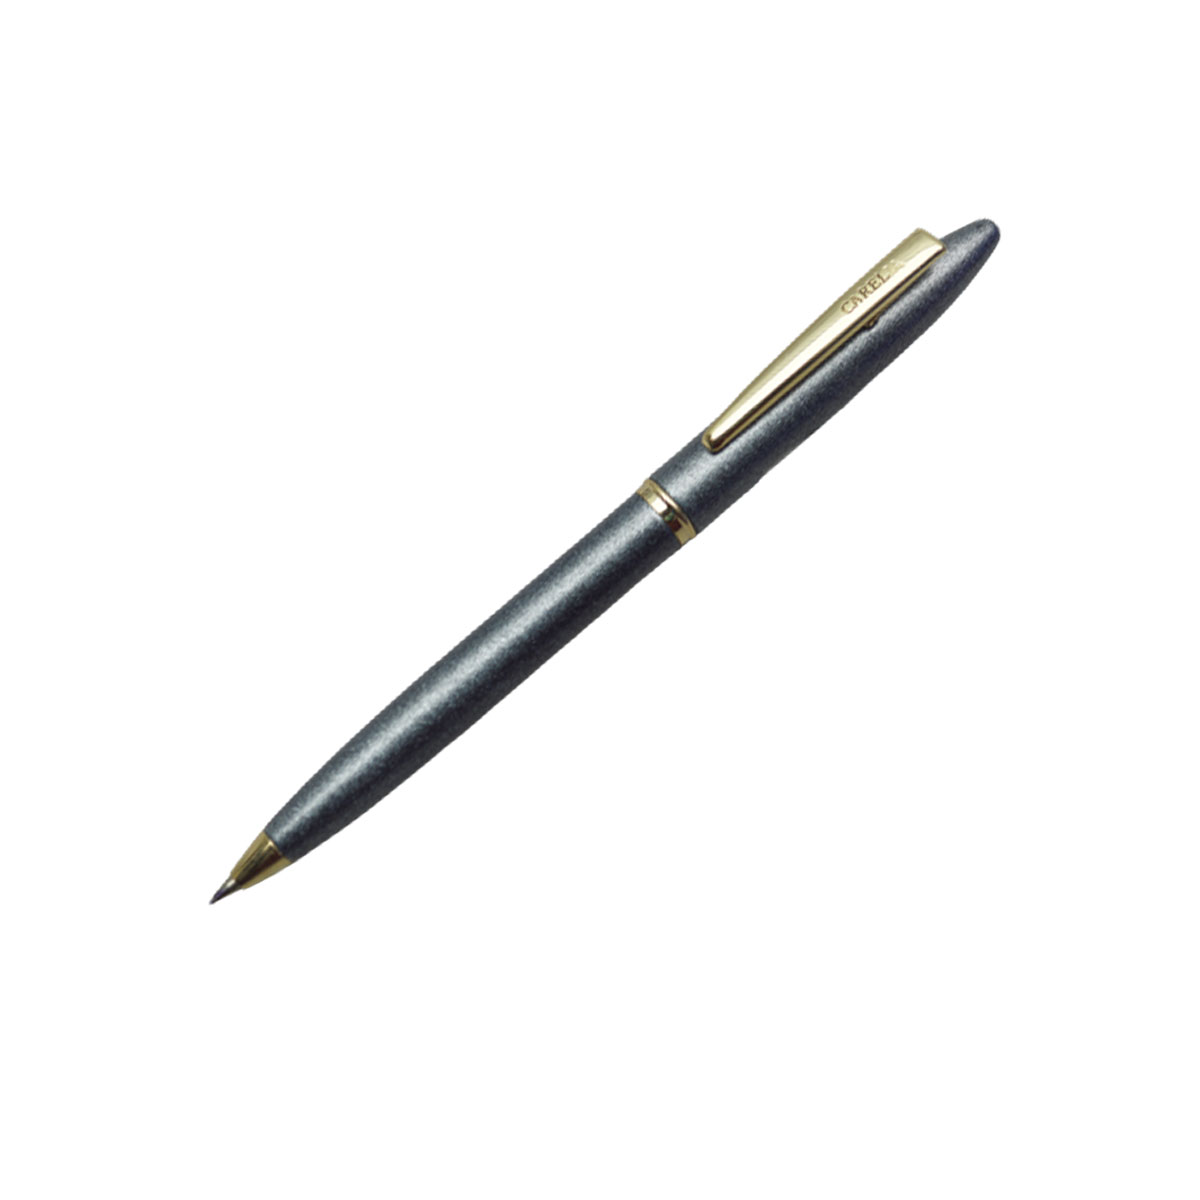 K-Nine Lugano Eco Series Shiny Grey Color With Gold Clip Twist Type 0.7mm Fine Tip Ball Pen SKU 19891